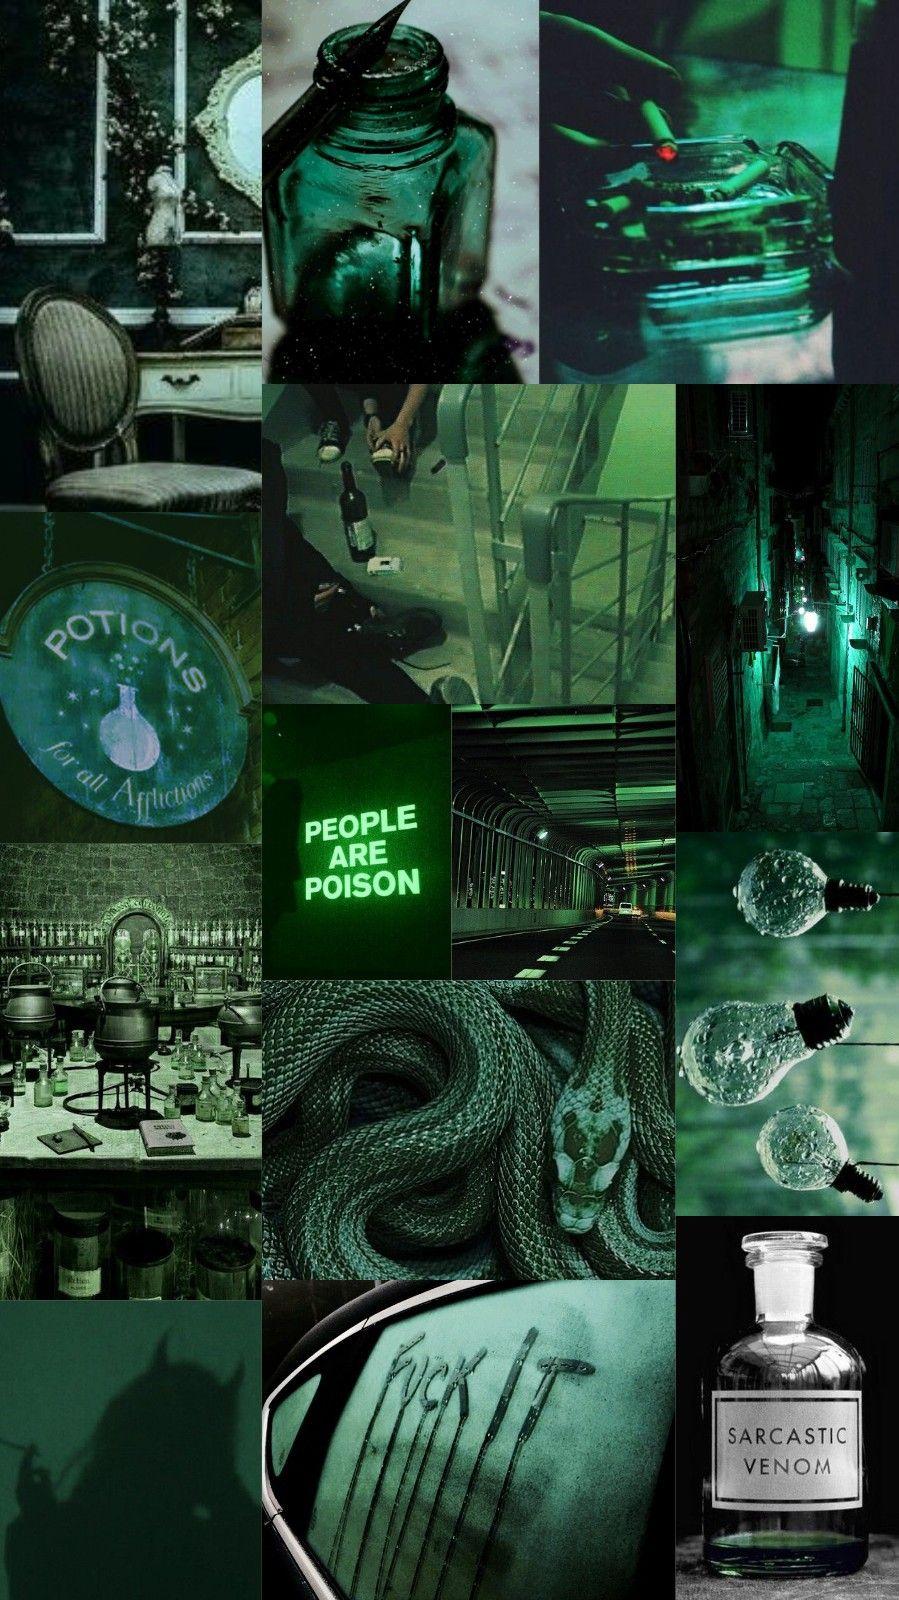 Wallpaper, background, collage, aesthetic, music, color, green, dark green, slytherin, poiso. Dark green aesthetic, Slytherin wallpaper, Black aesthetic wallpaper